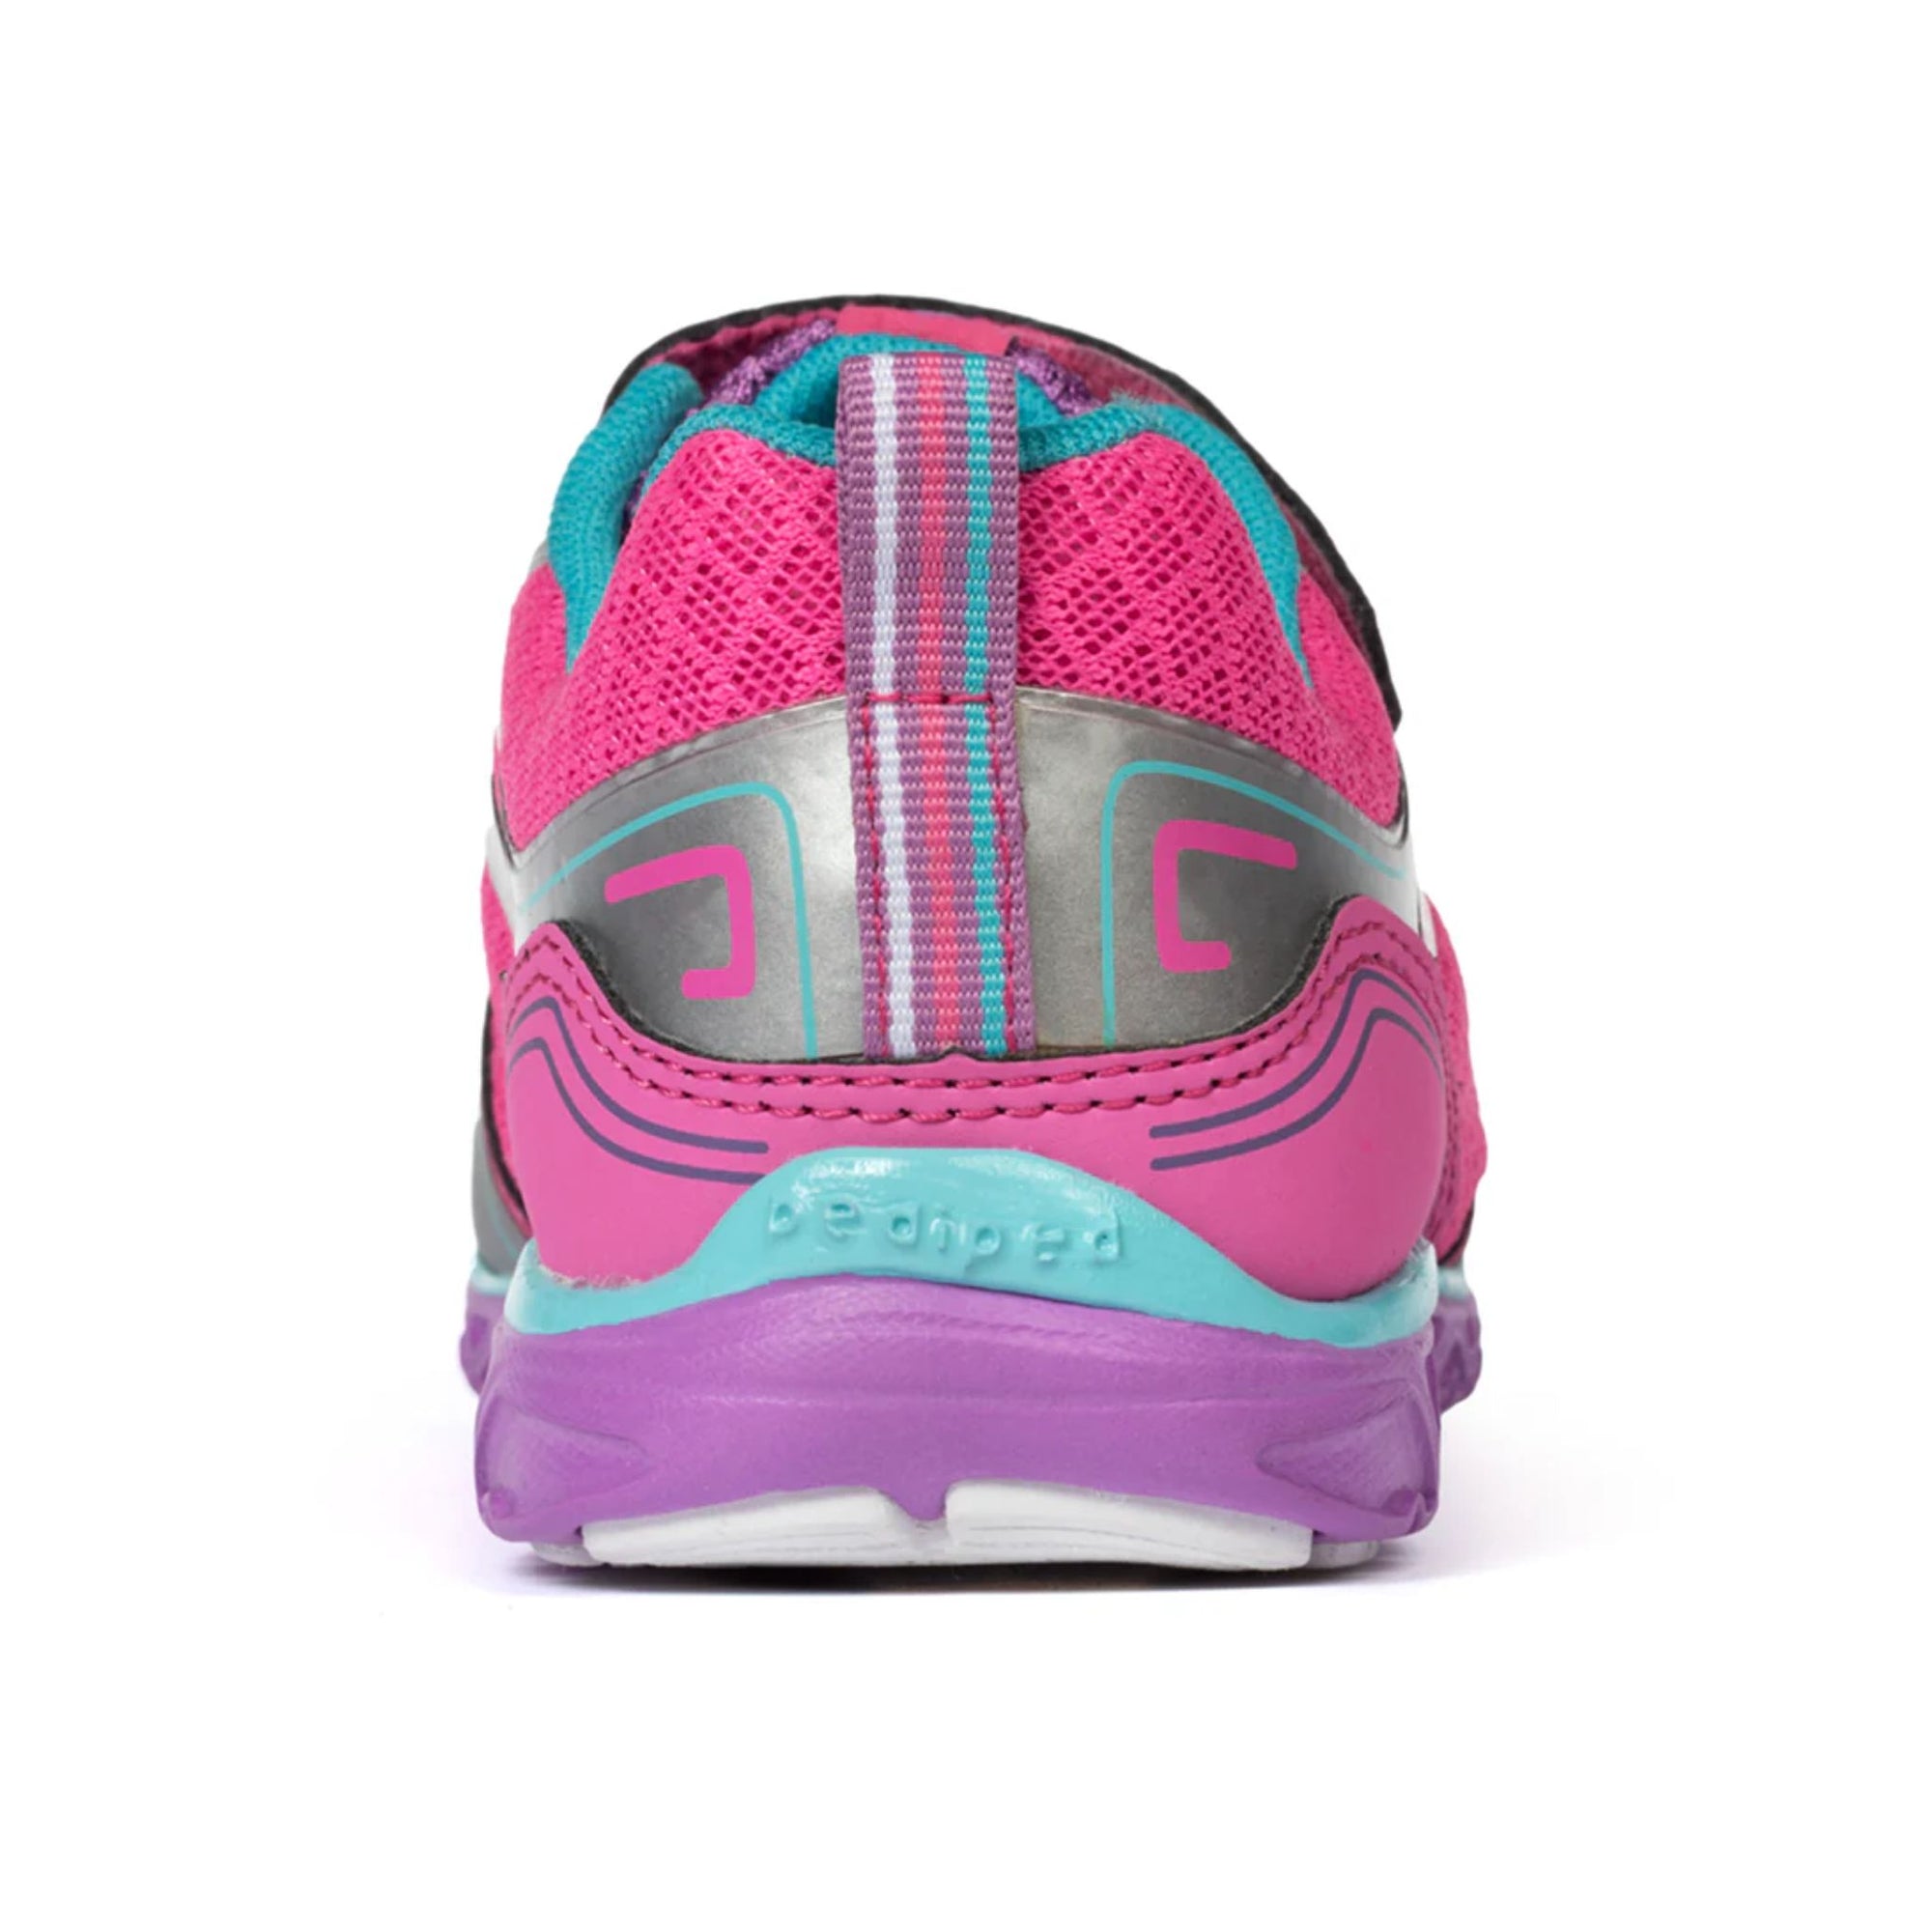 Pediped Flex Force Pink / Silver Athletic Shoes